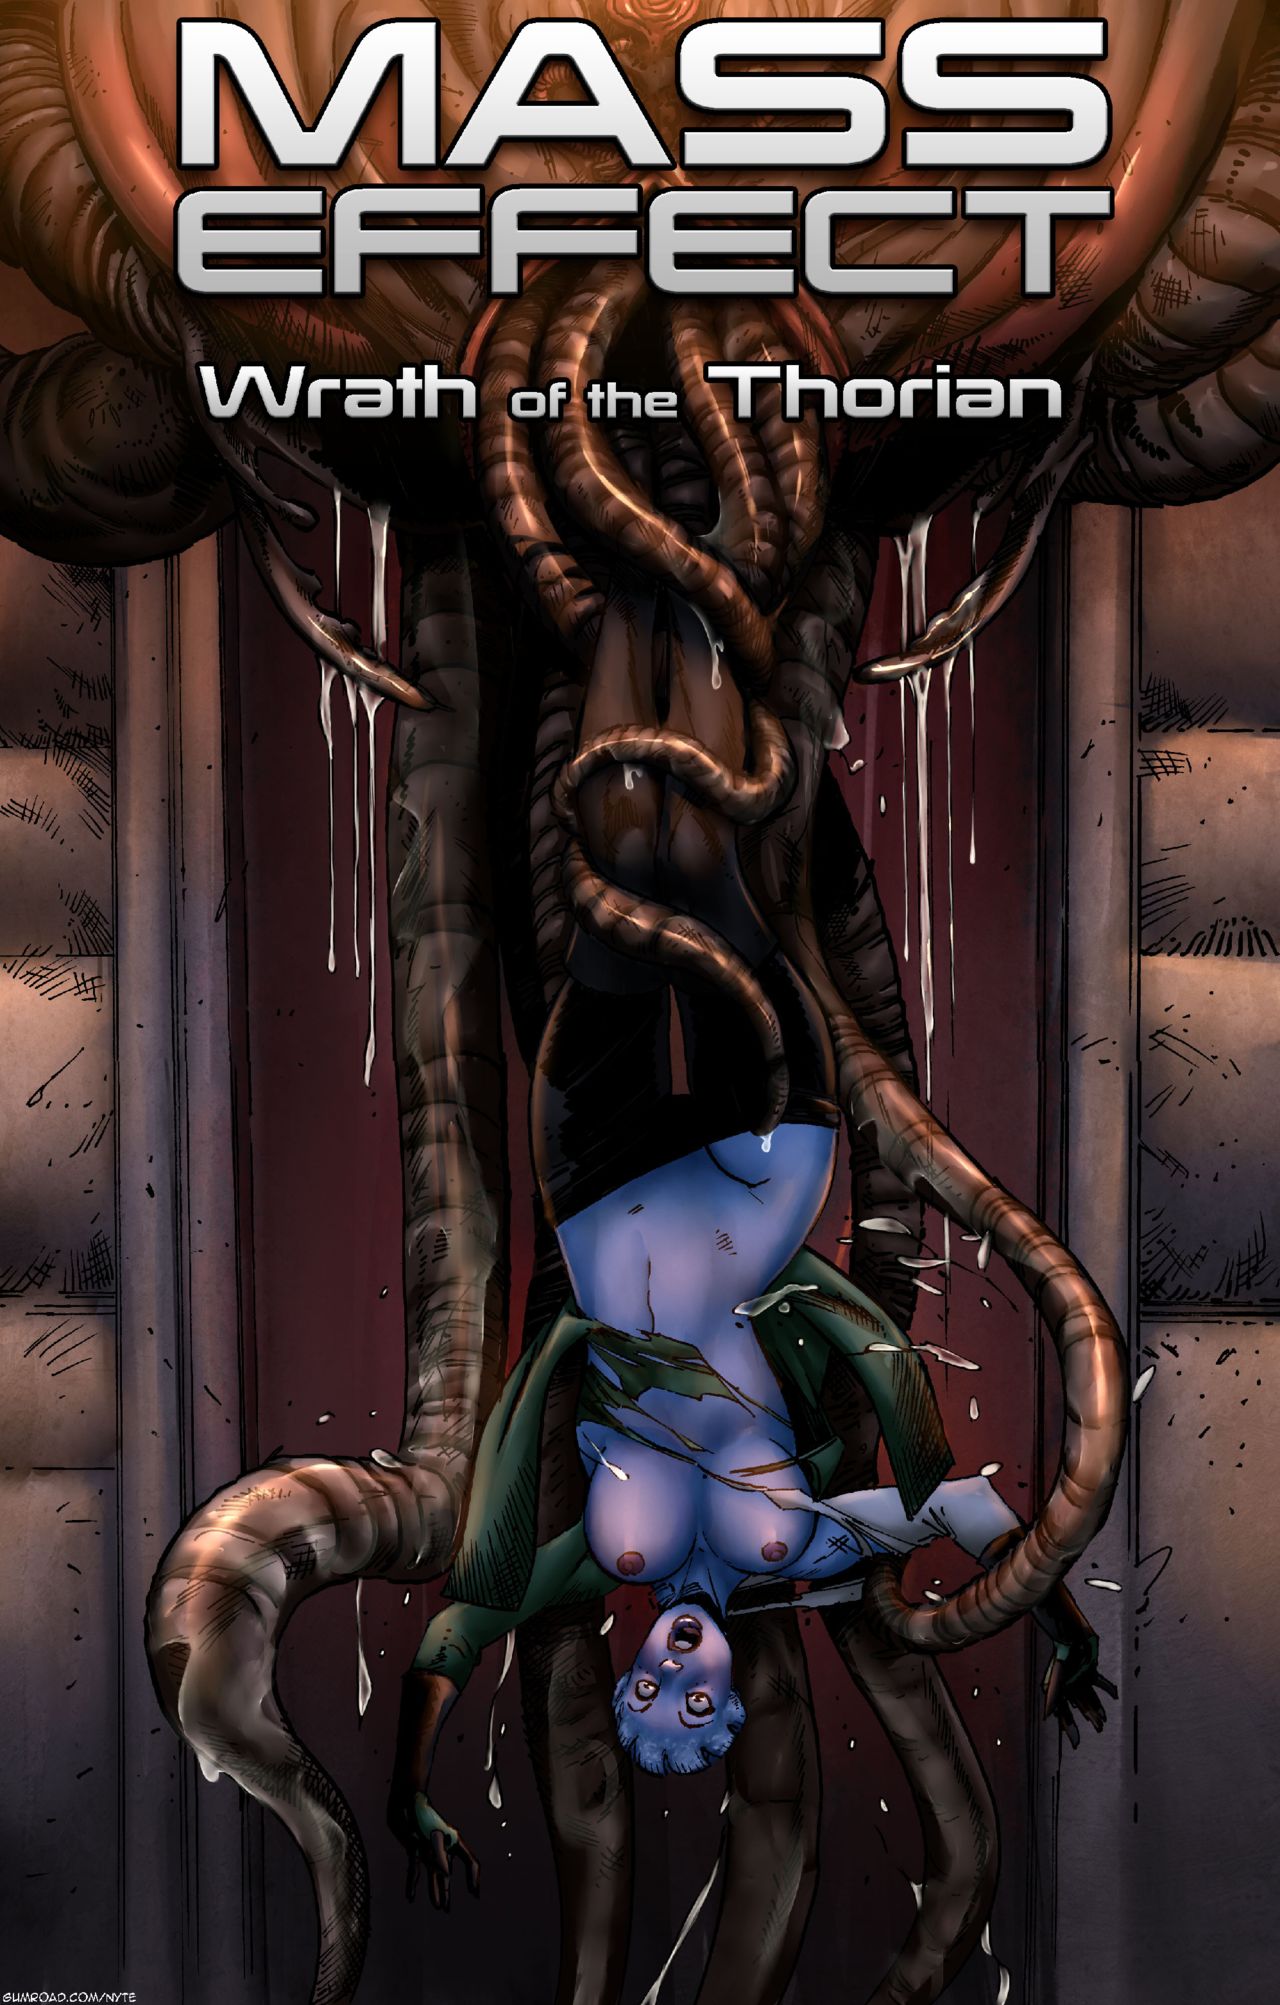 Mass effect wrath of the thorian porn comic